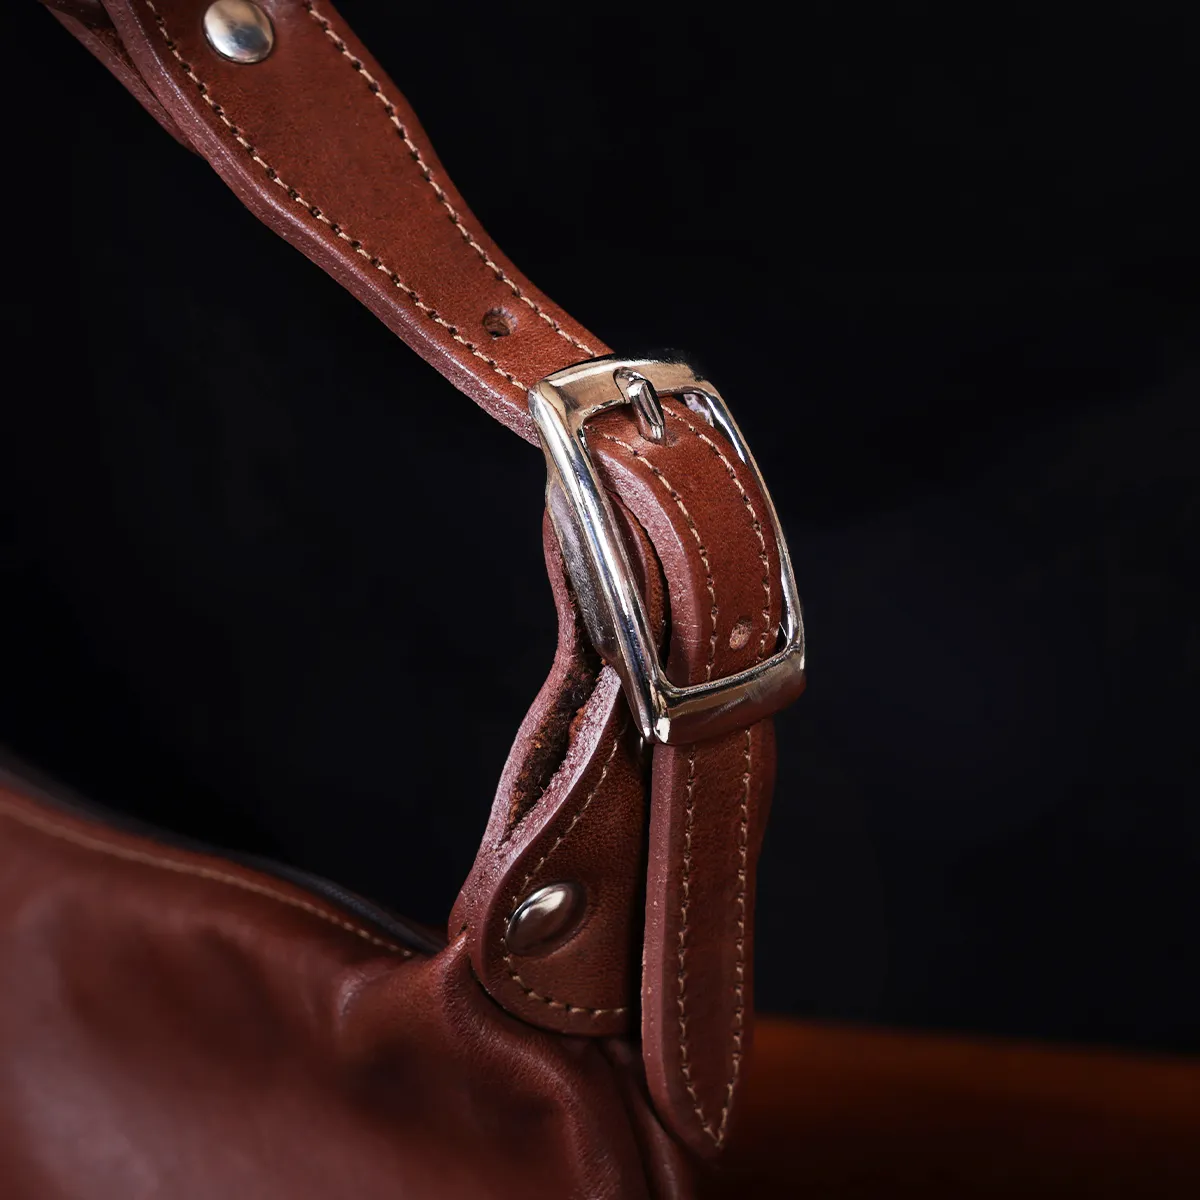 AMERICAN LEATHER CO. Holly Convertible Shoulder Bag